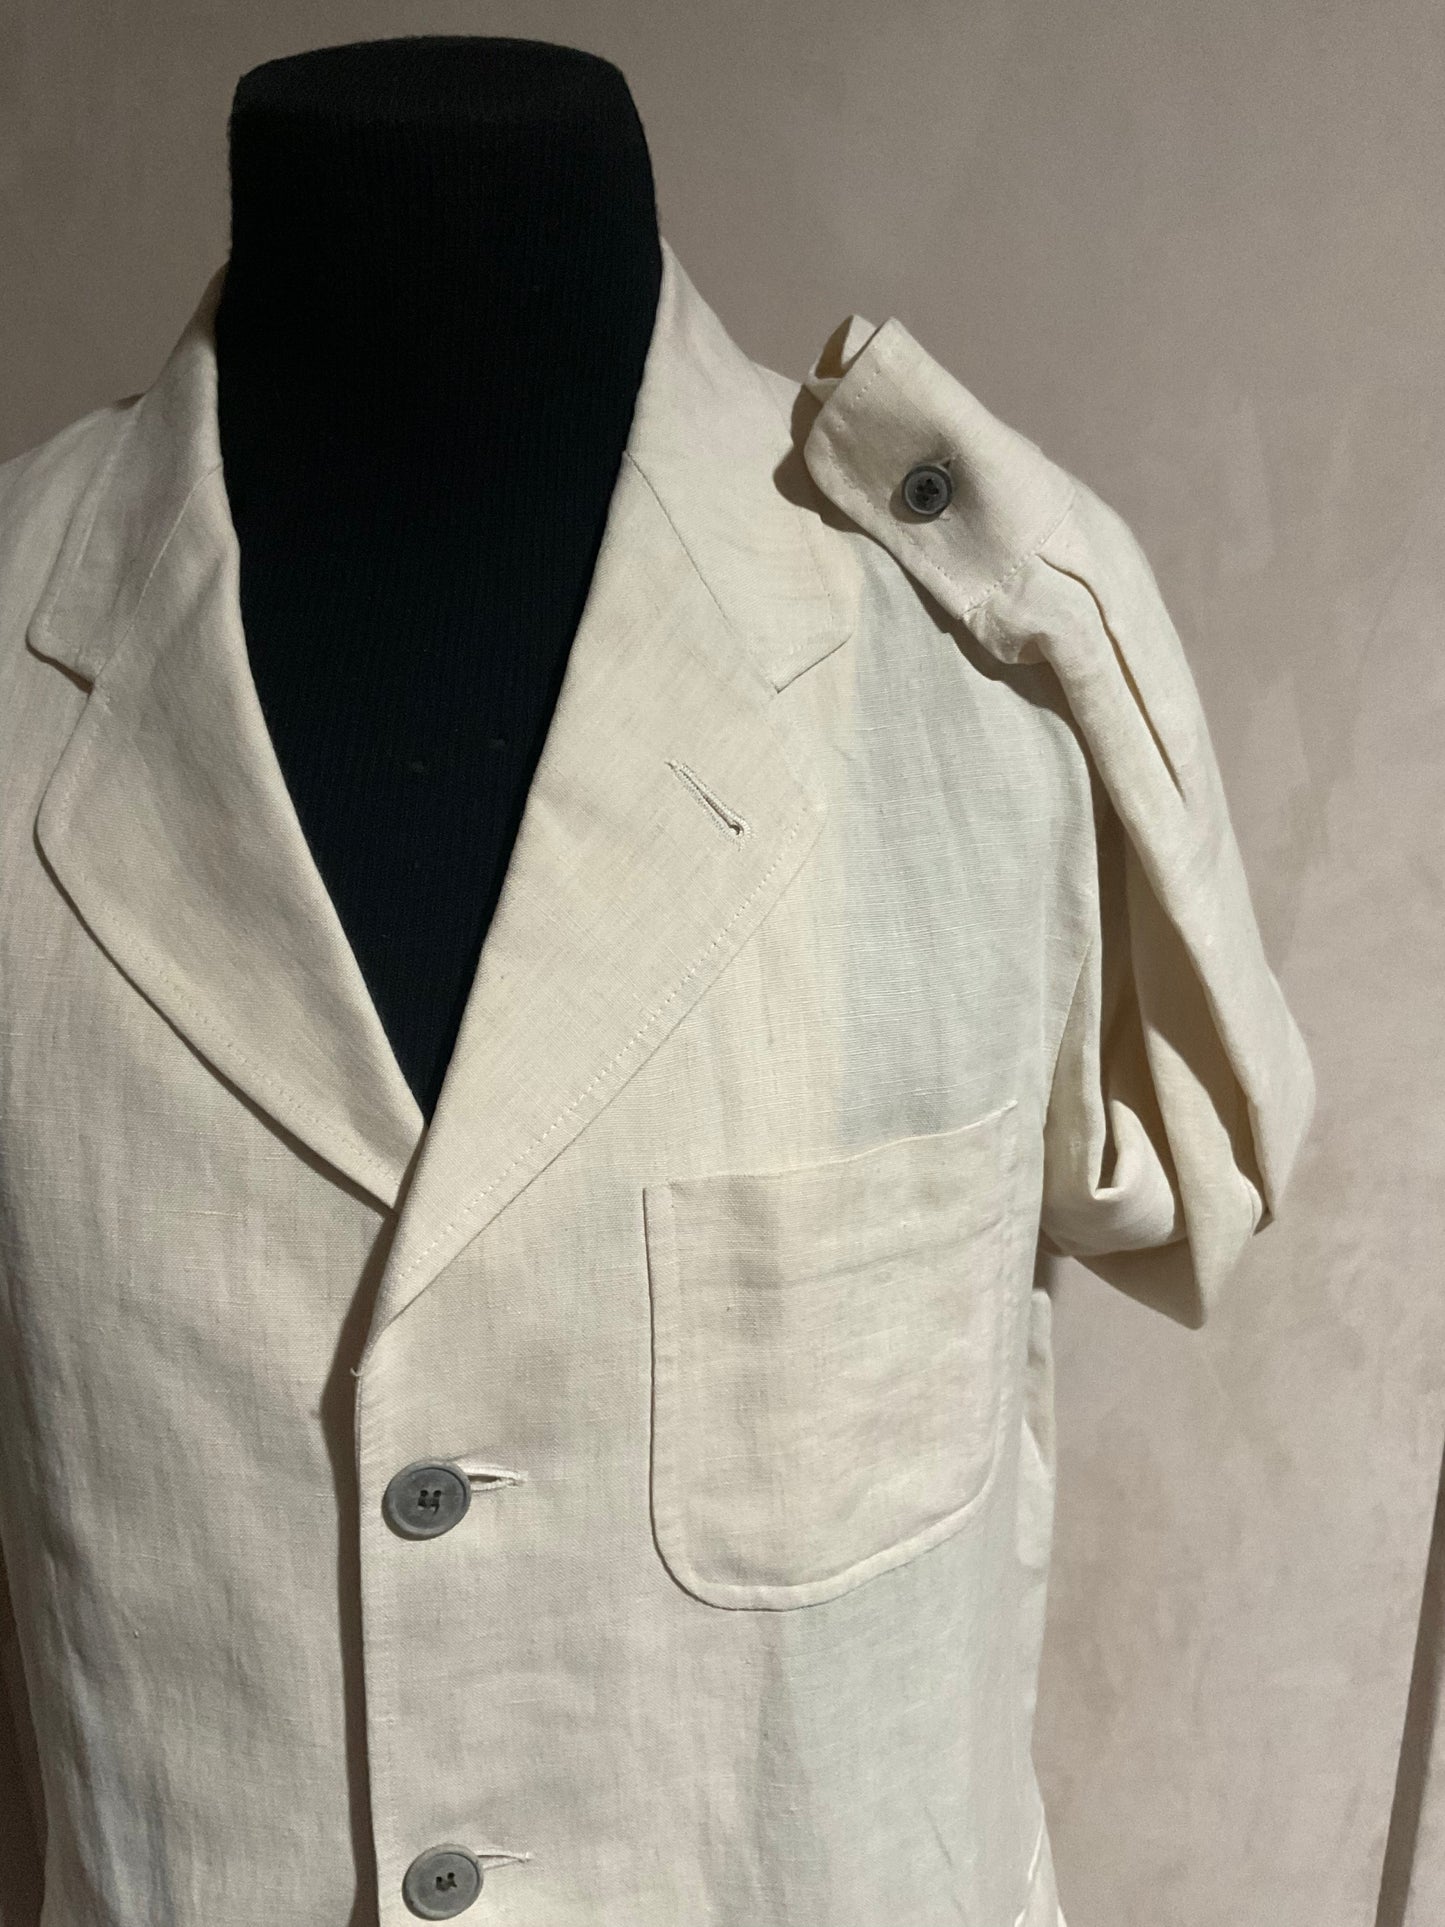 R P SPORTS JACKET / CREAM LINEN / UNCONSTRUCTED / MEDIUM - LARGE / NEW / MADE IN USA